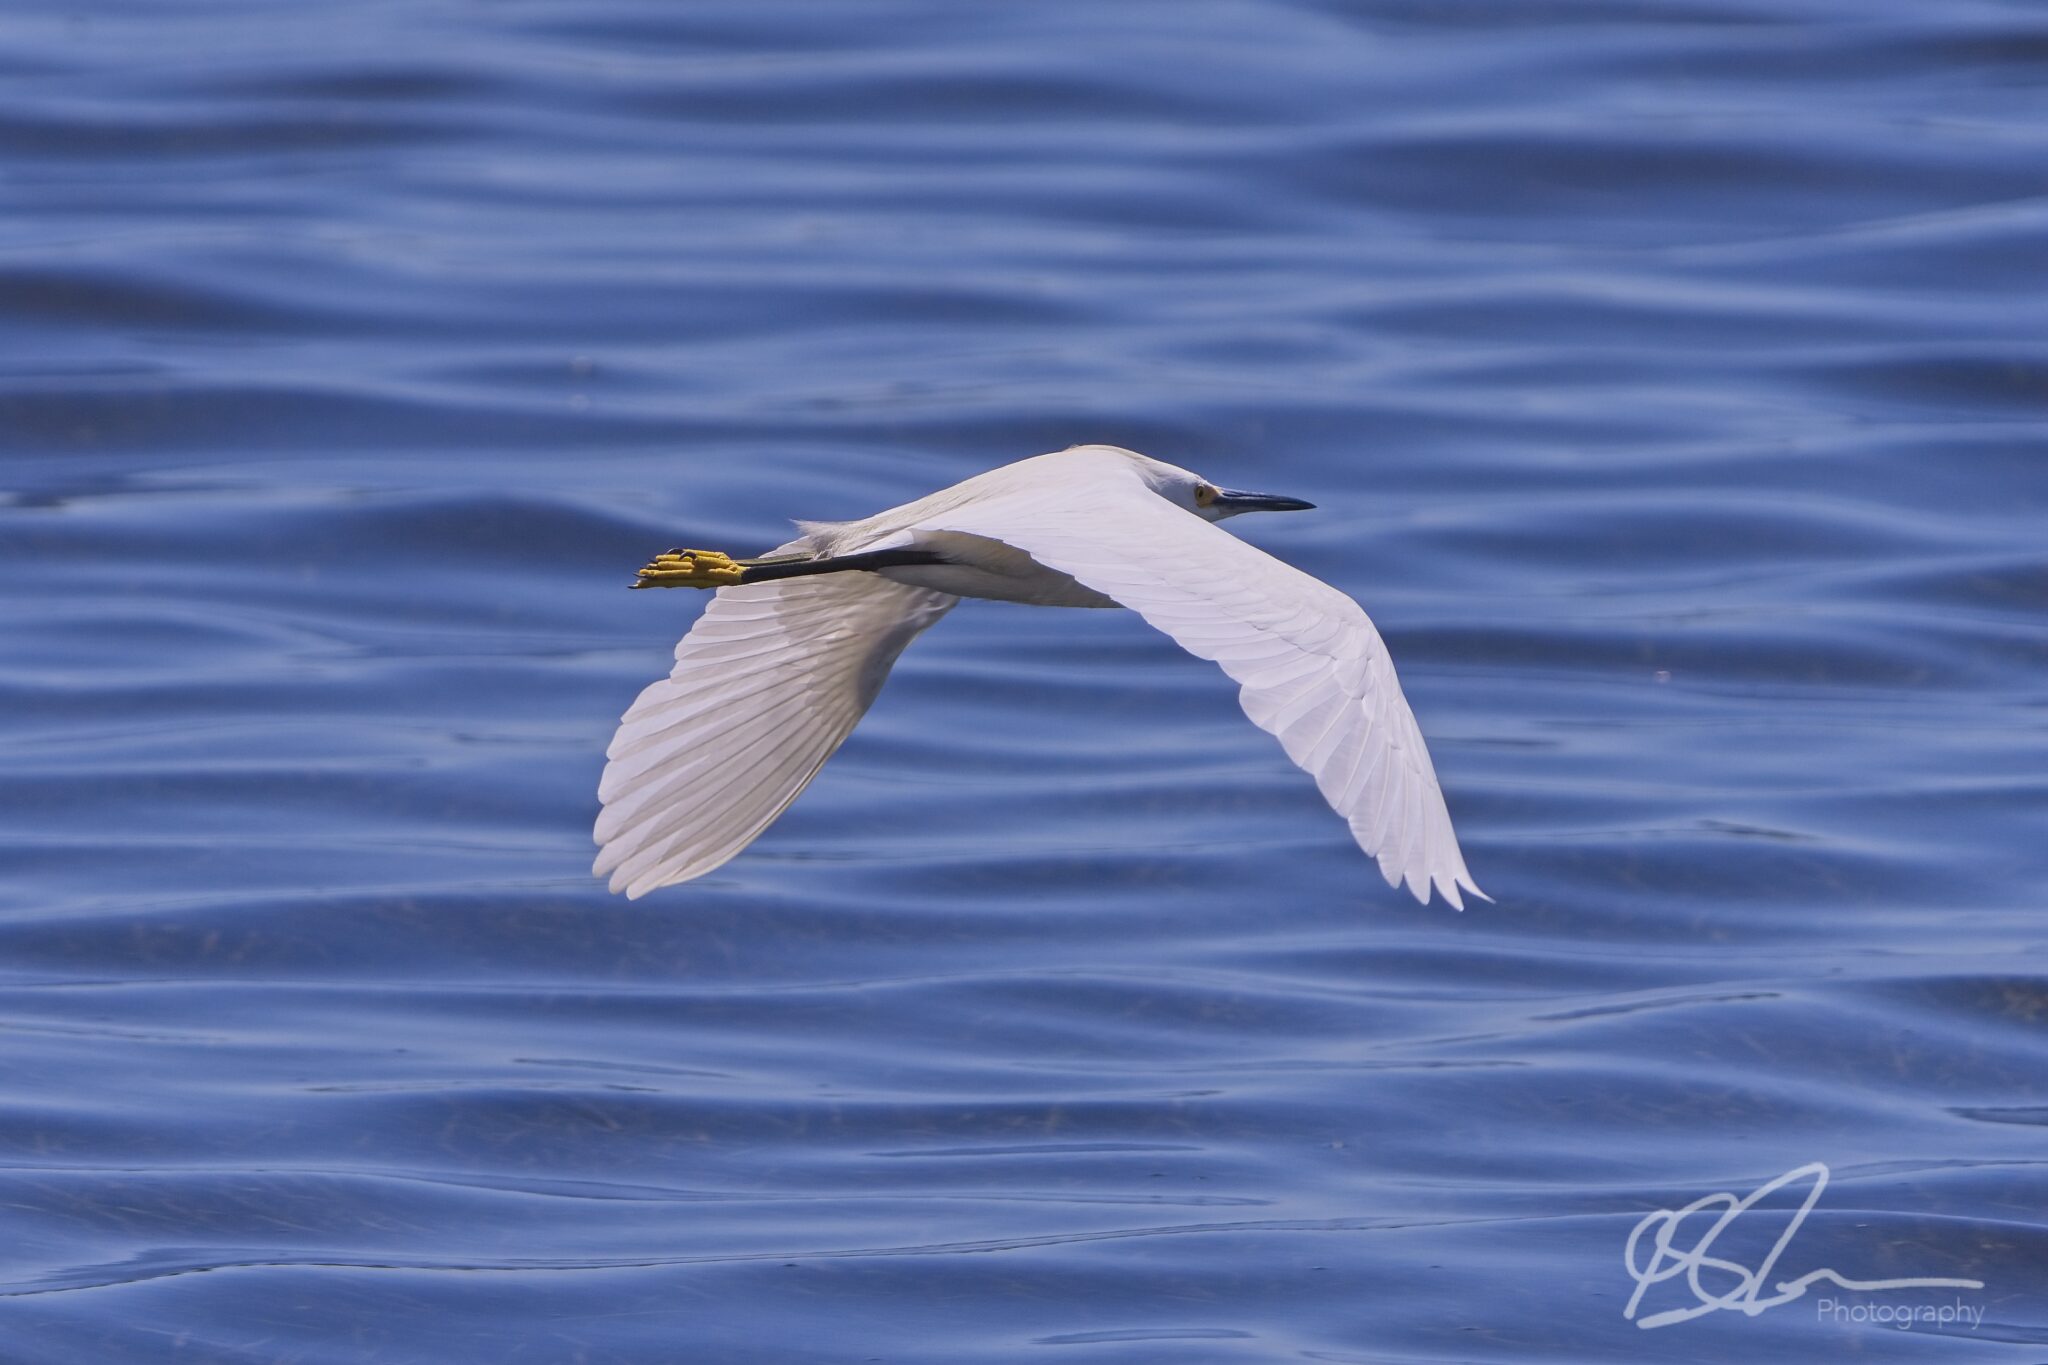 A Snowy Egret in flight over St. Andrew's Bay